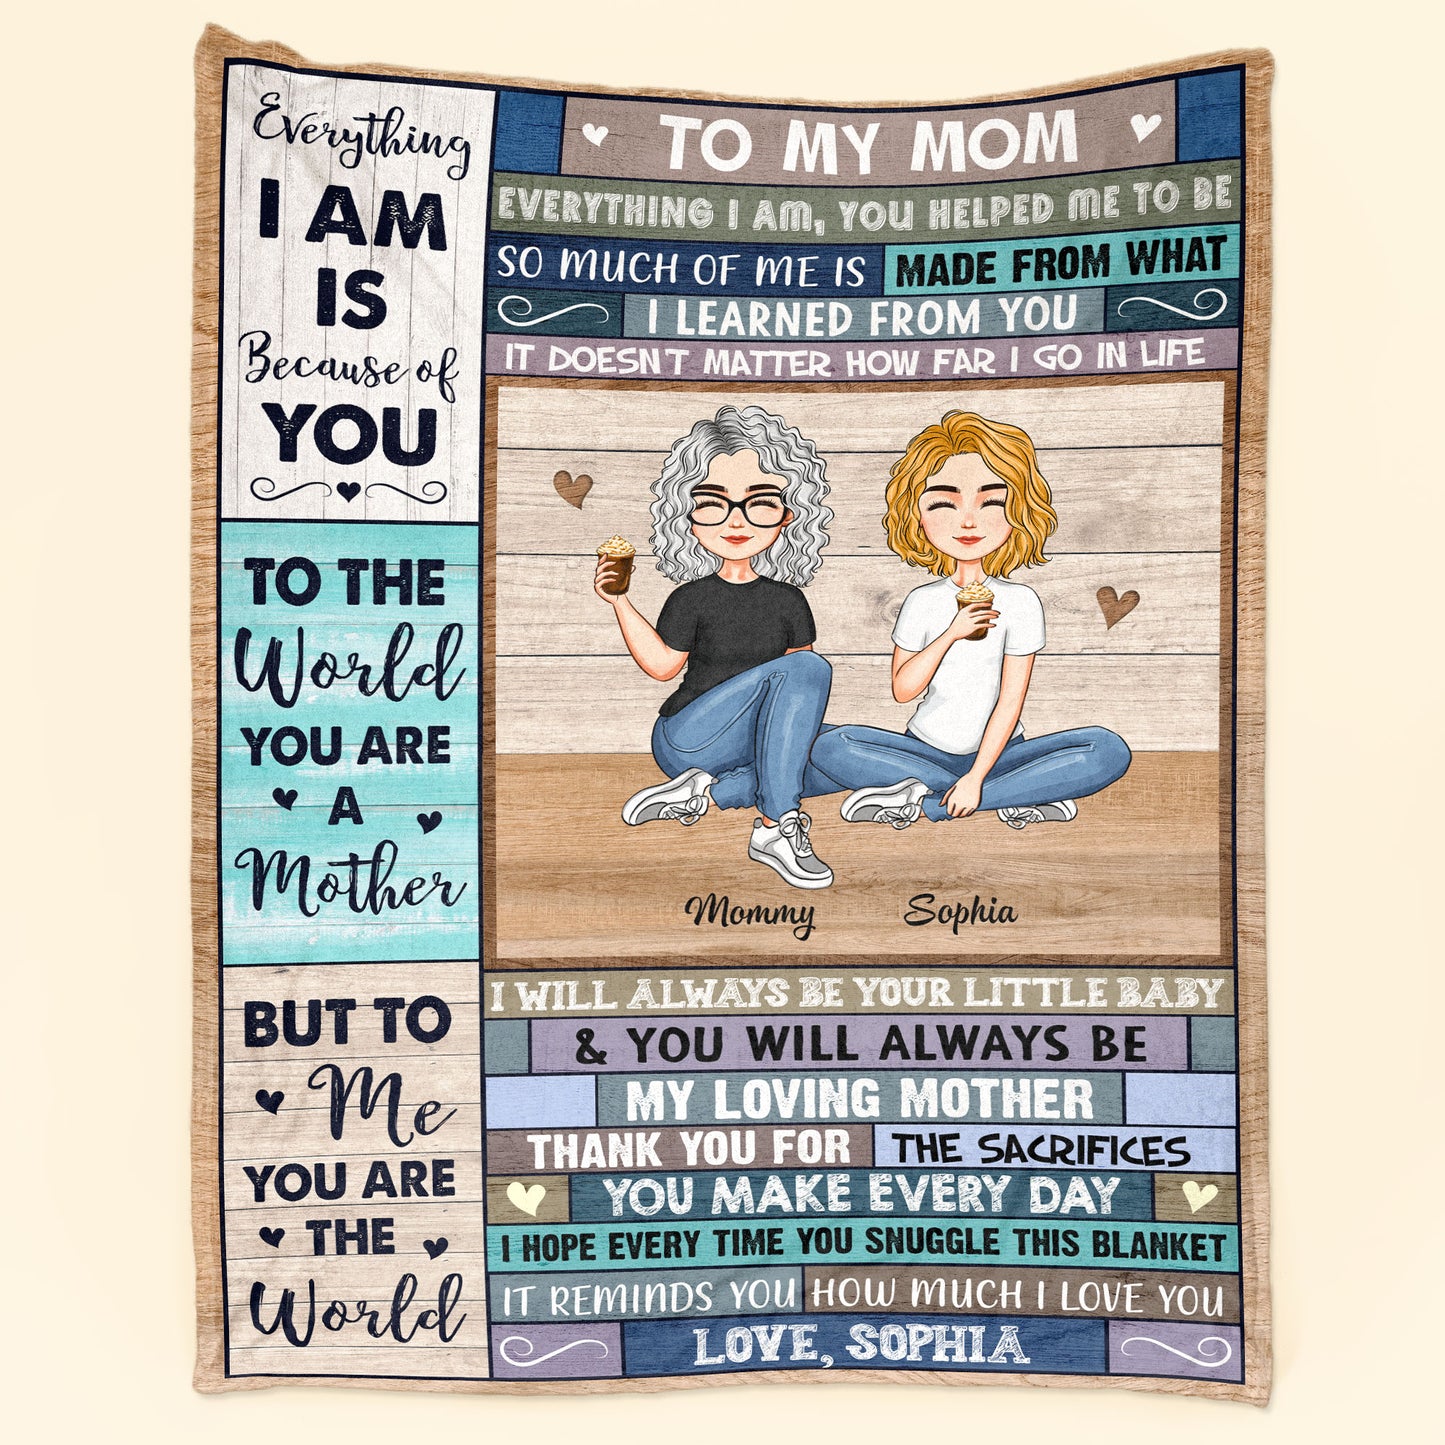 This Cozy Blanket Reminds You How Much I Love You - Personalized Blanket